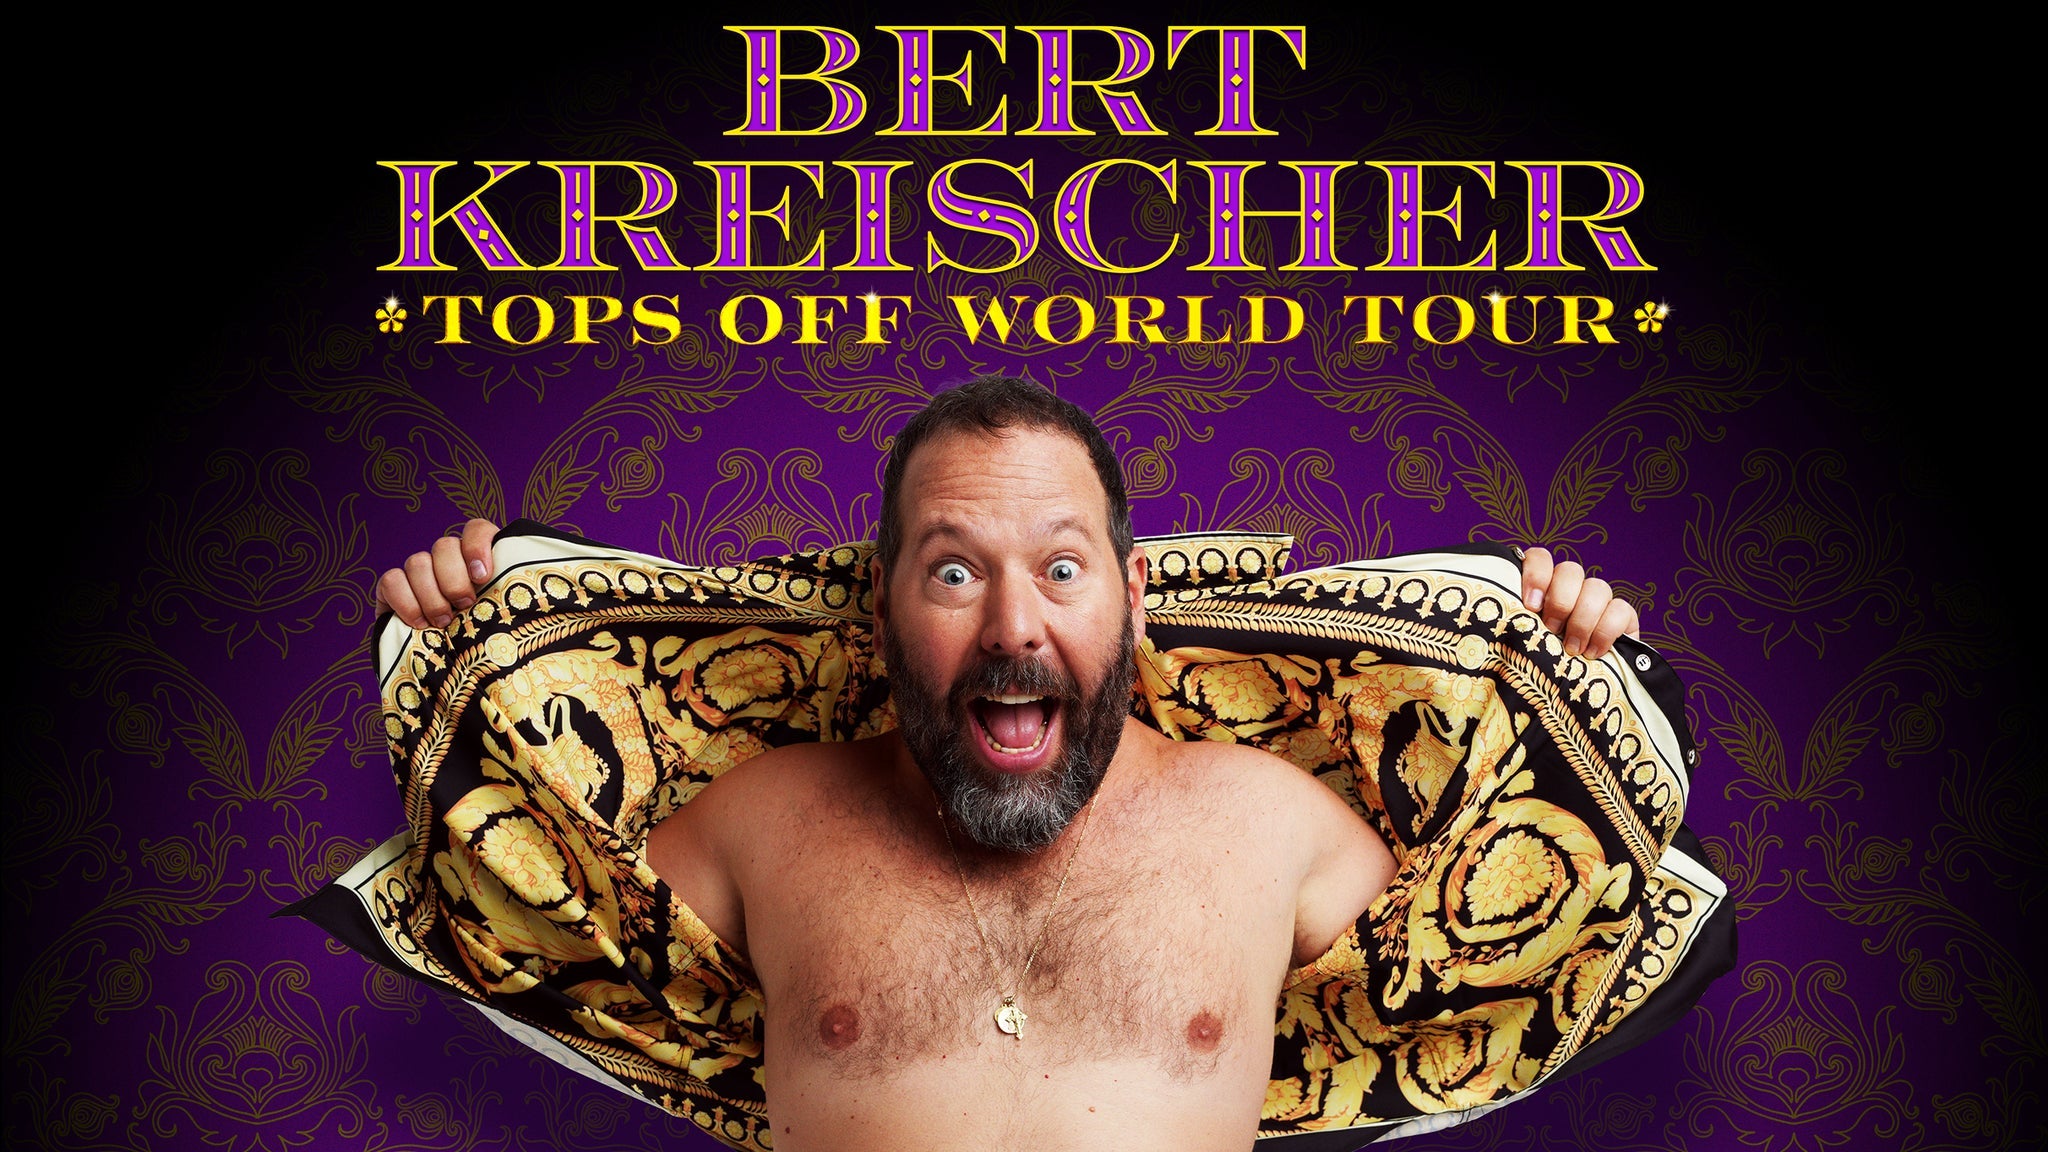 Image used with permission from Ticketmaster | Bert Kreischer - Tops Off World Tour tickets